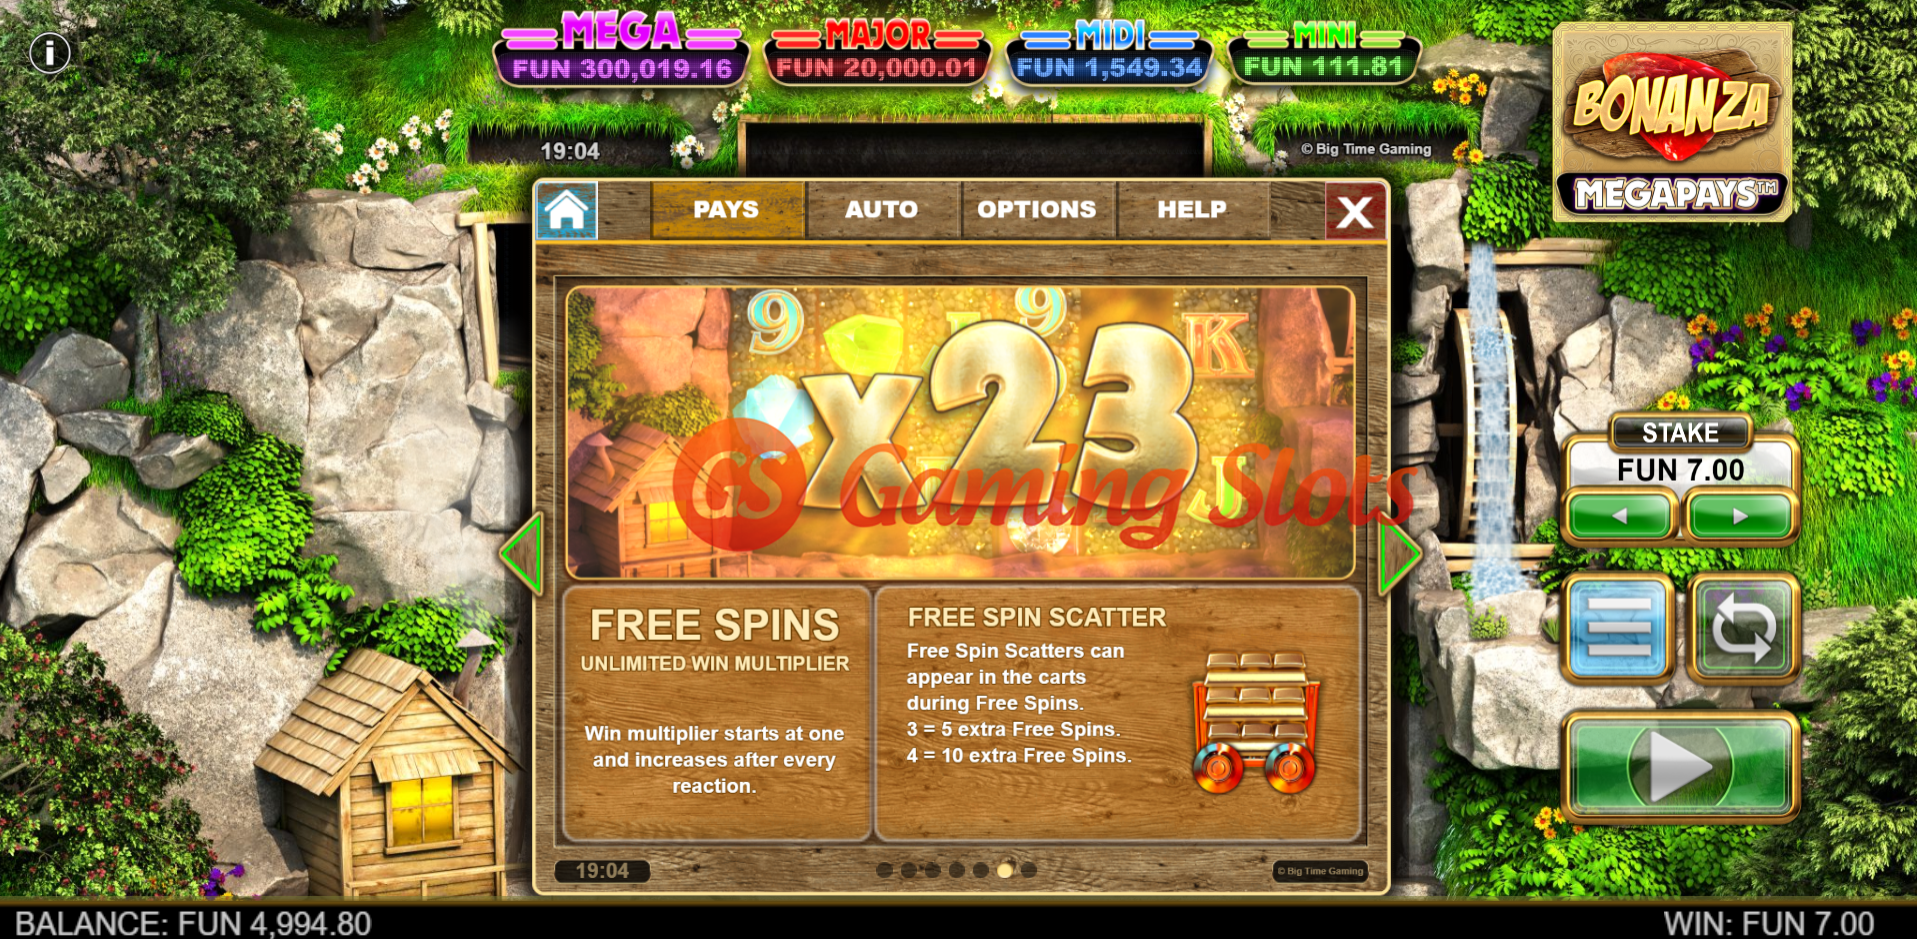 Game Rules for Bonanza Megapays slot from Big Time Gaming